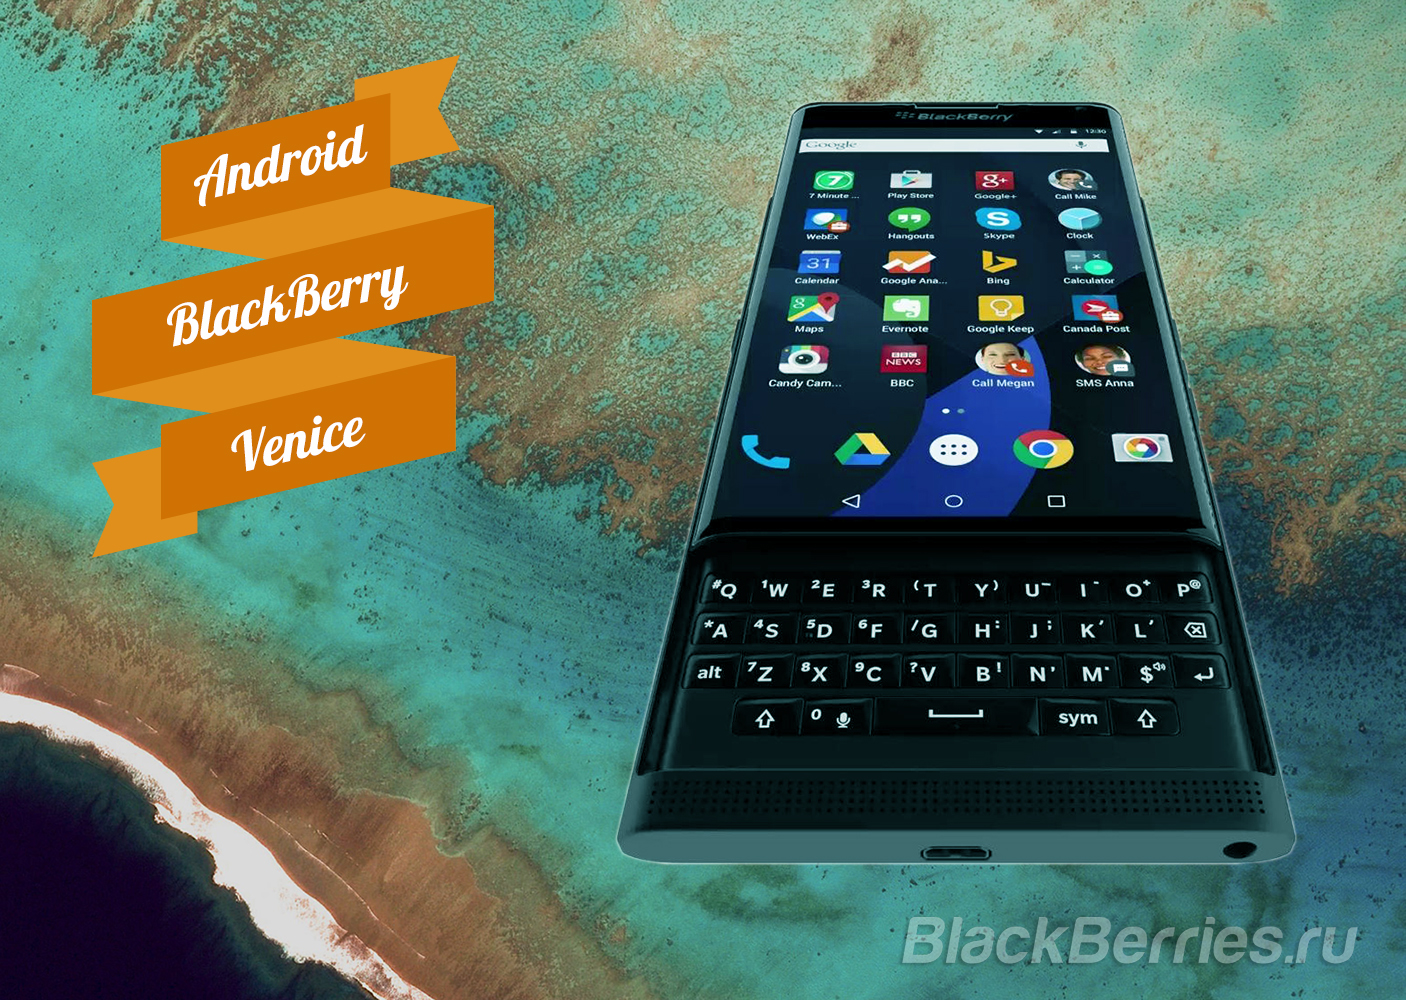 BlackBerry-Venice-Android